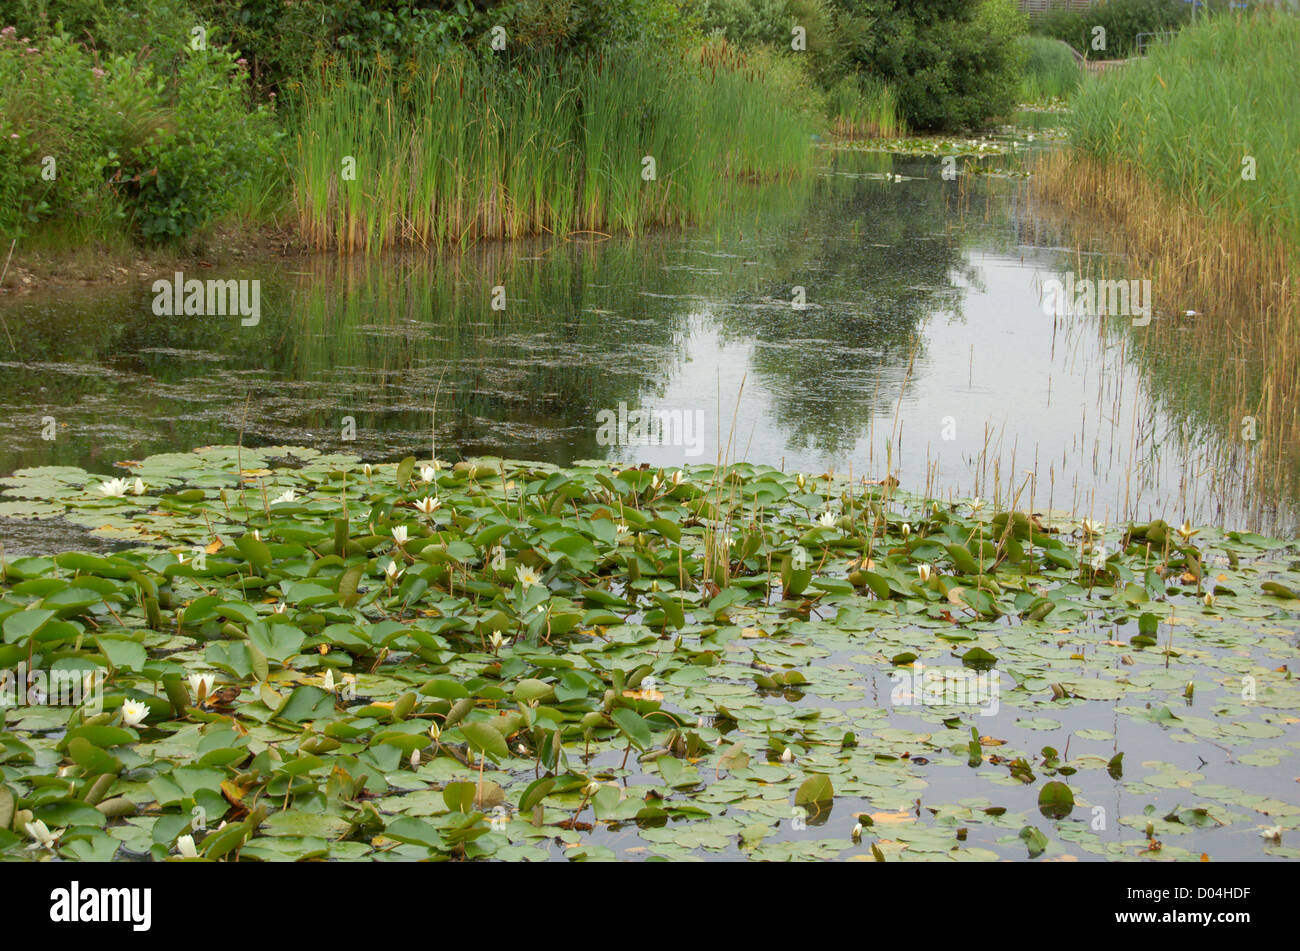 Water lillies and reeds on the surface of a pond Stock Photo